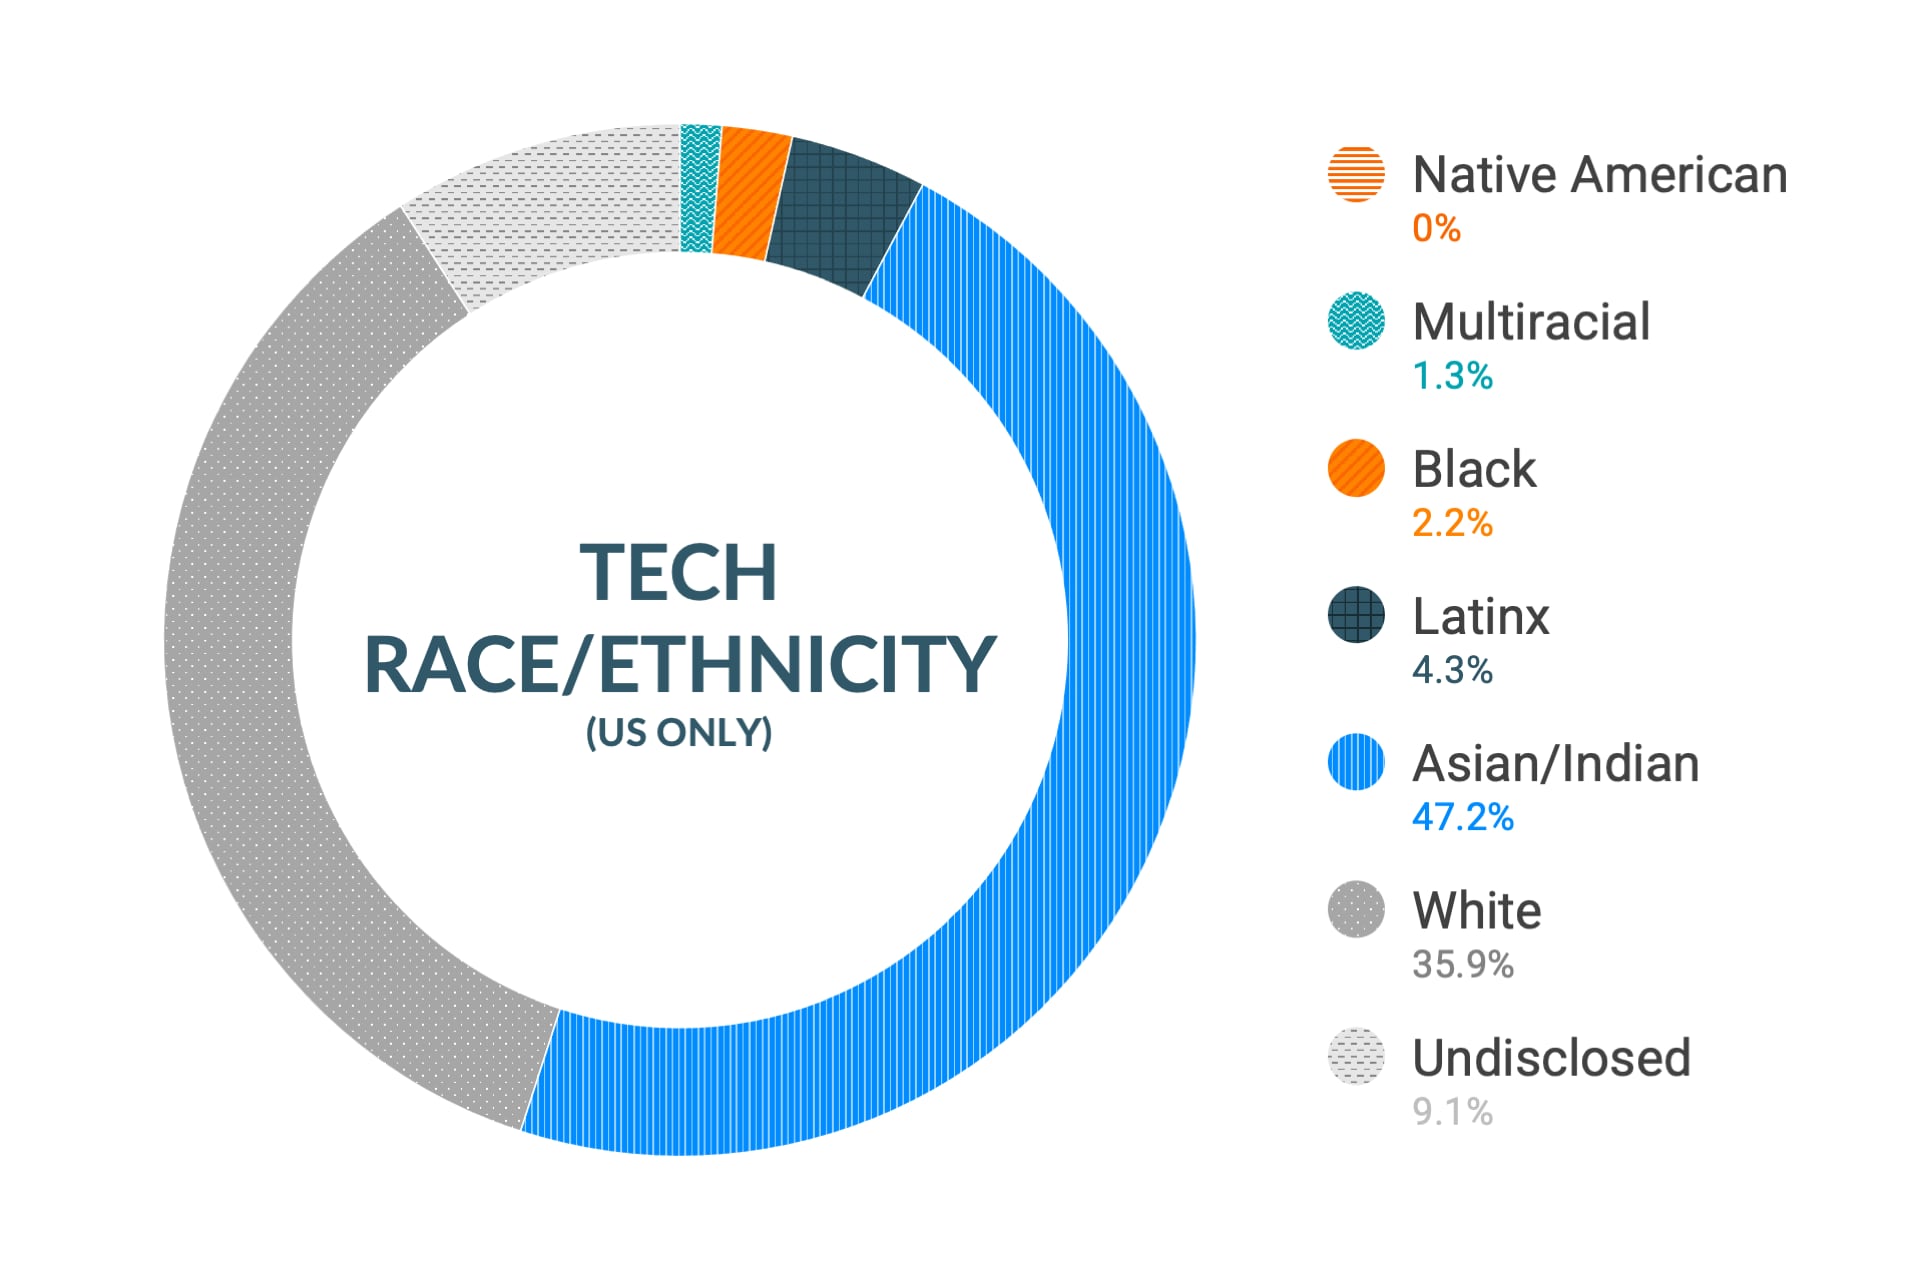 Cloudera Diversity and Inclusion data for Race and Ethnicity in U.S. Technical and Engineering Roles: Native American 0%, Multiracial 1.6%, Black 2.3%, Latinx 2.9%, Asian and Indian 46.7%, White 37.6%, Undisclosed 8.9%